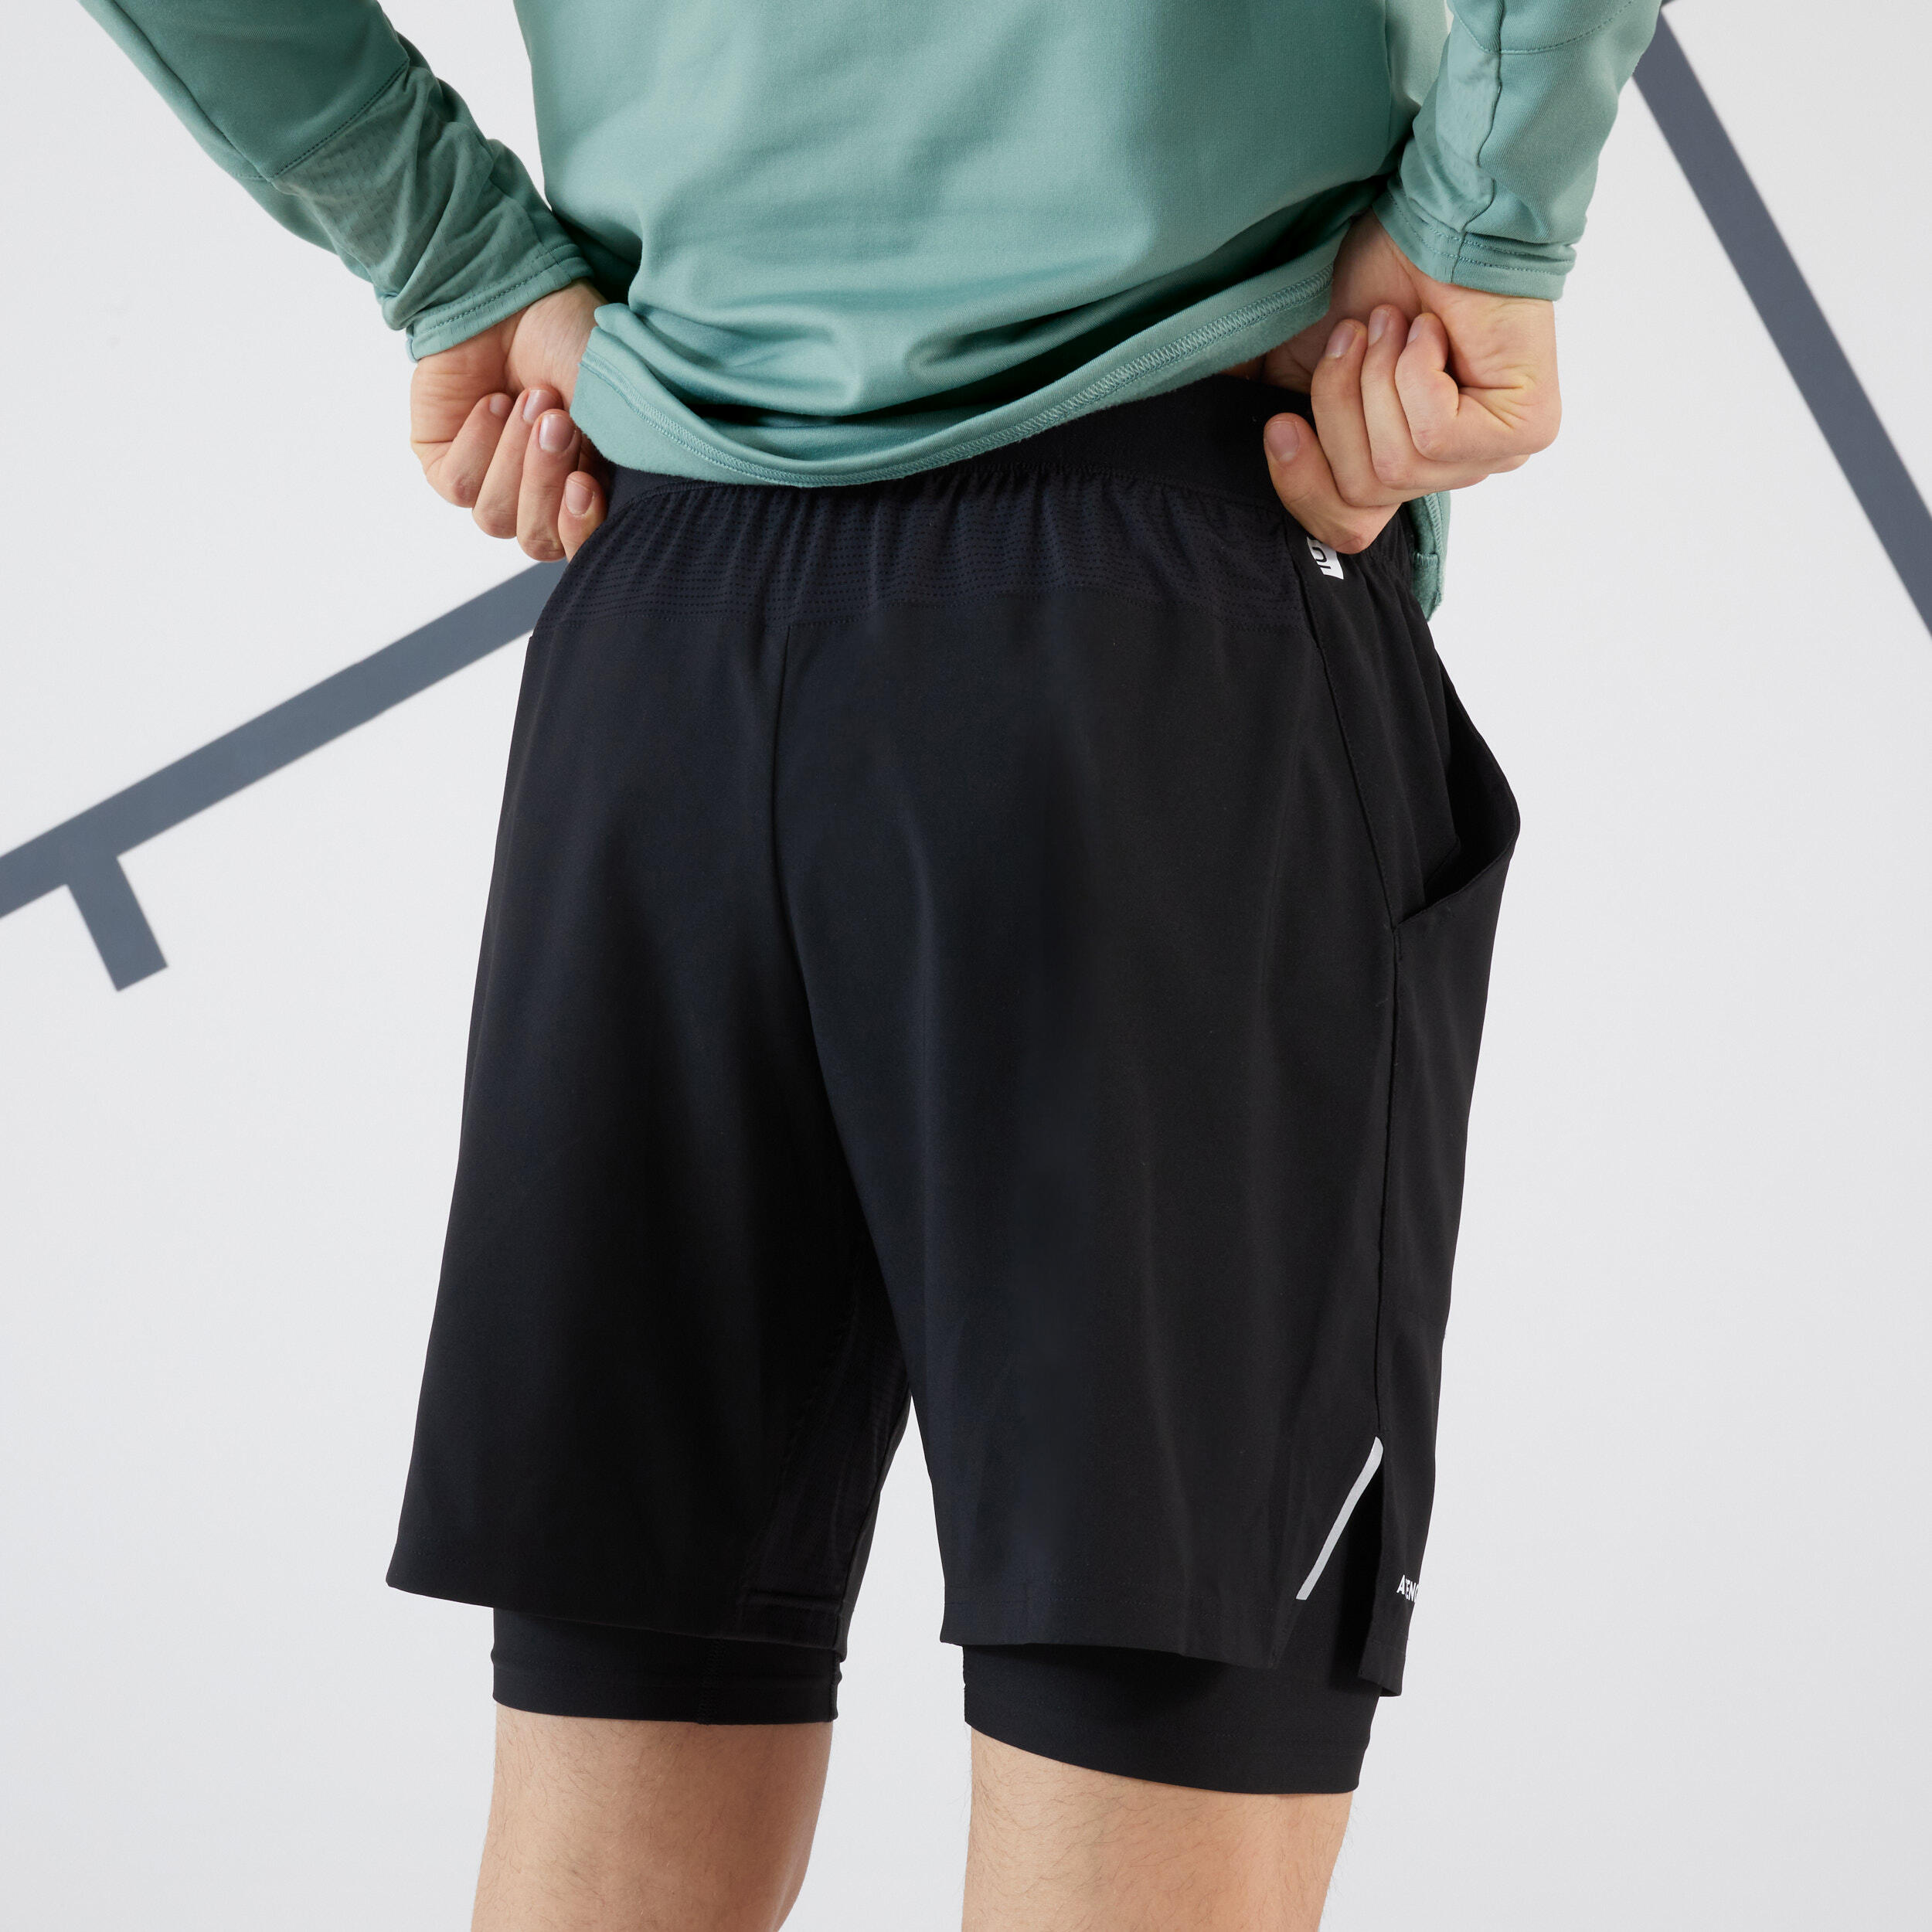 Men's Tennis 2-in-1 Shorts and Undershorts Thermic - Black/Black 3/8